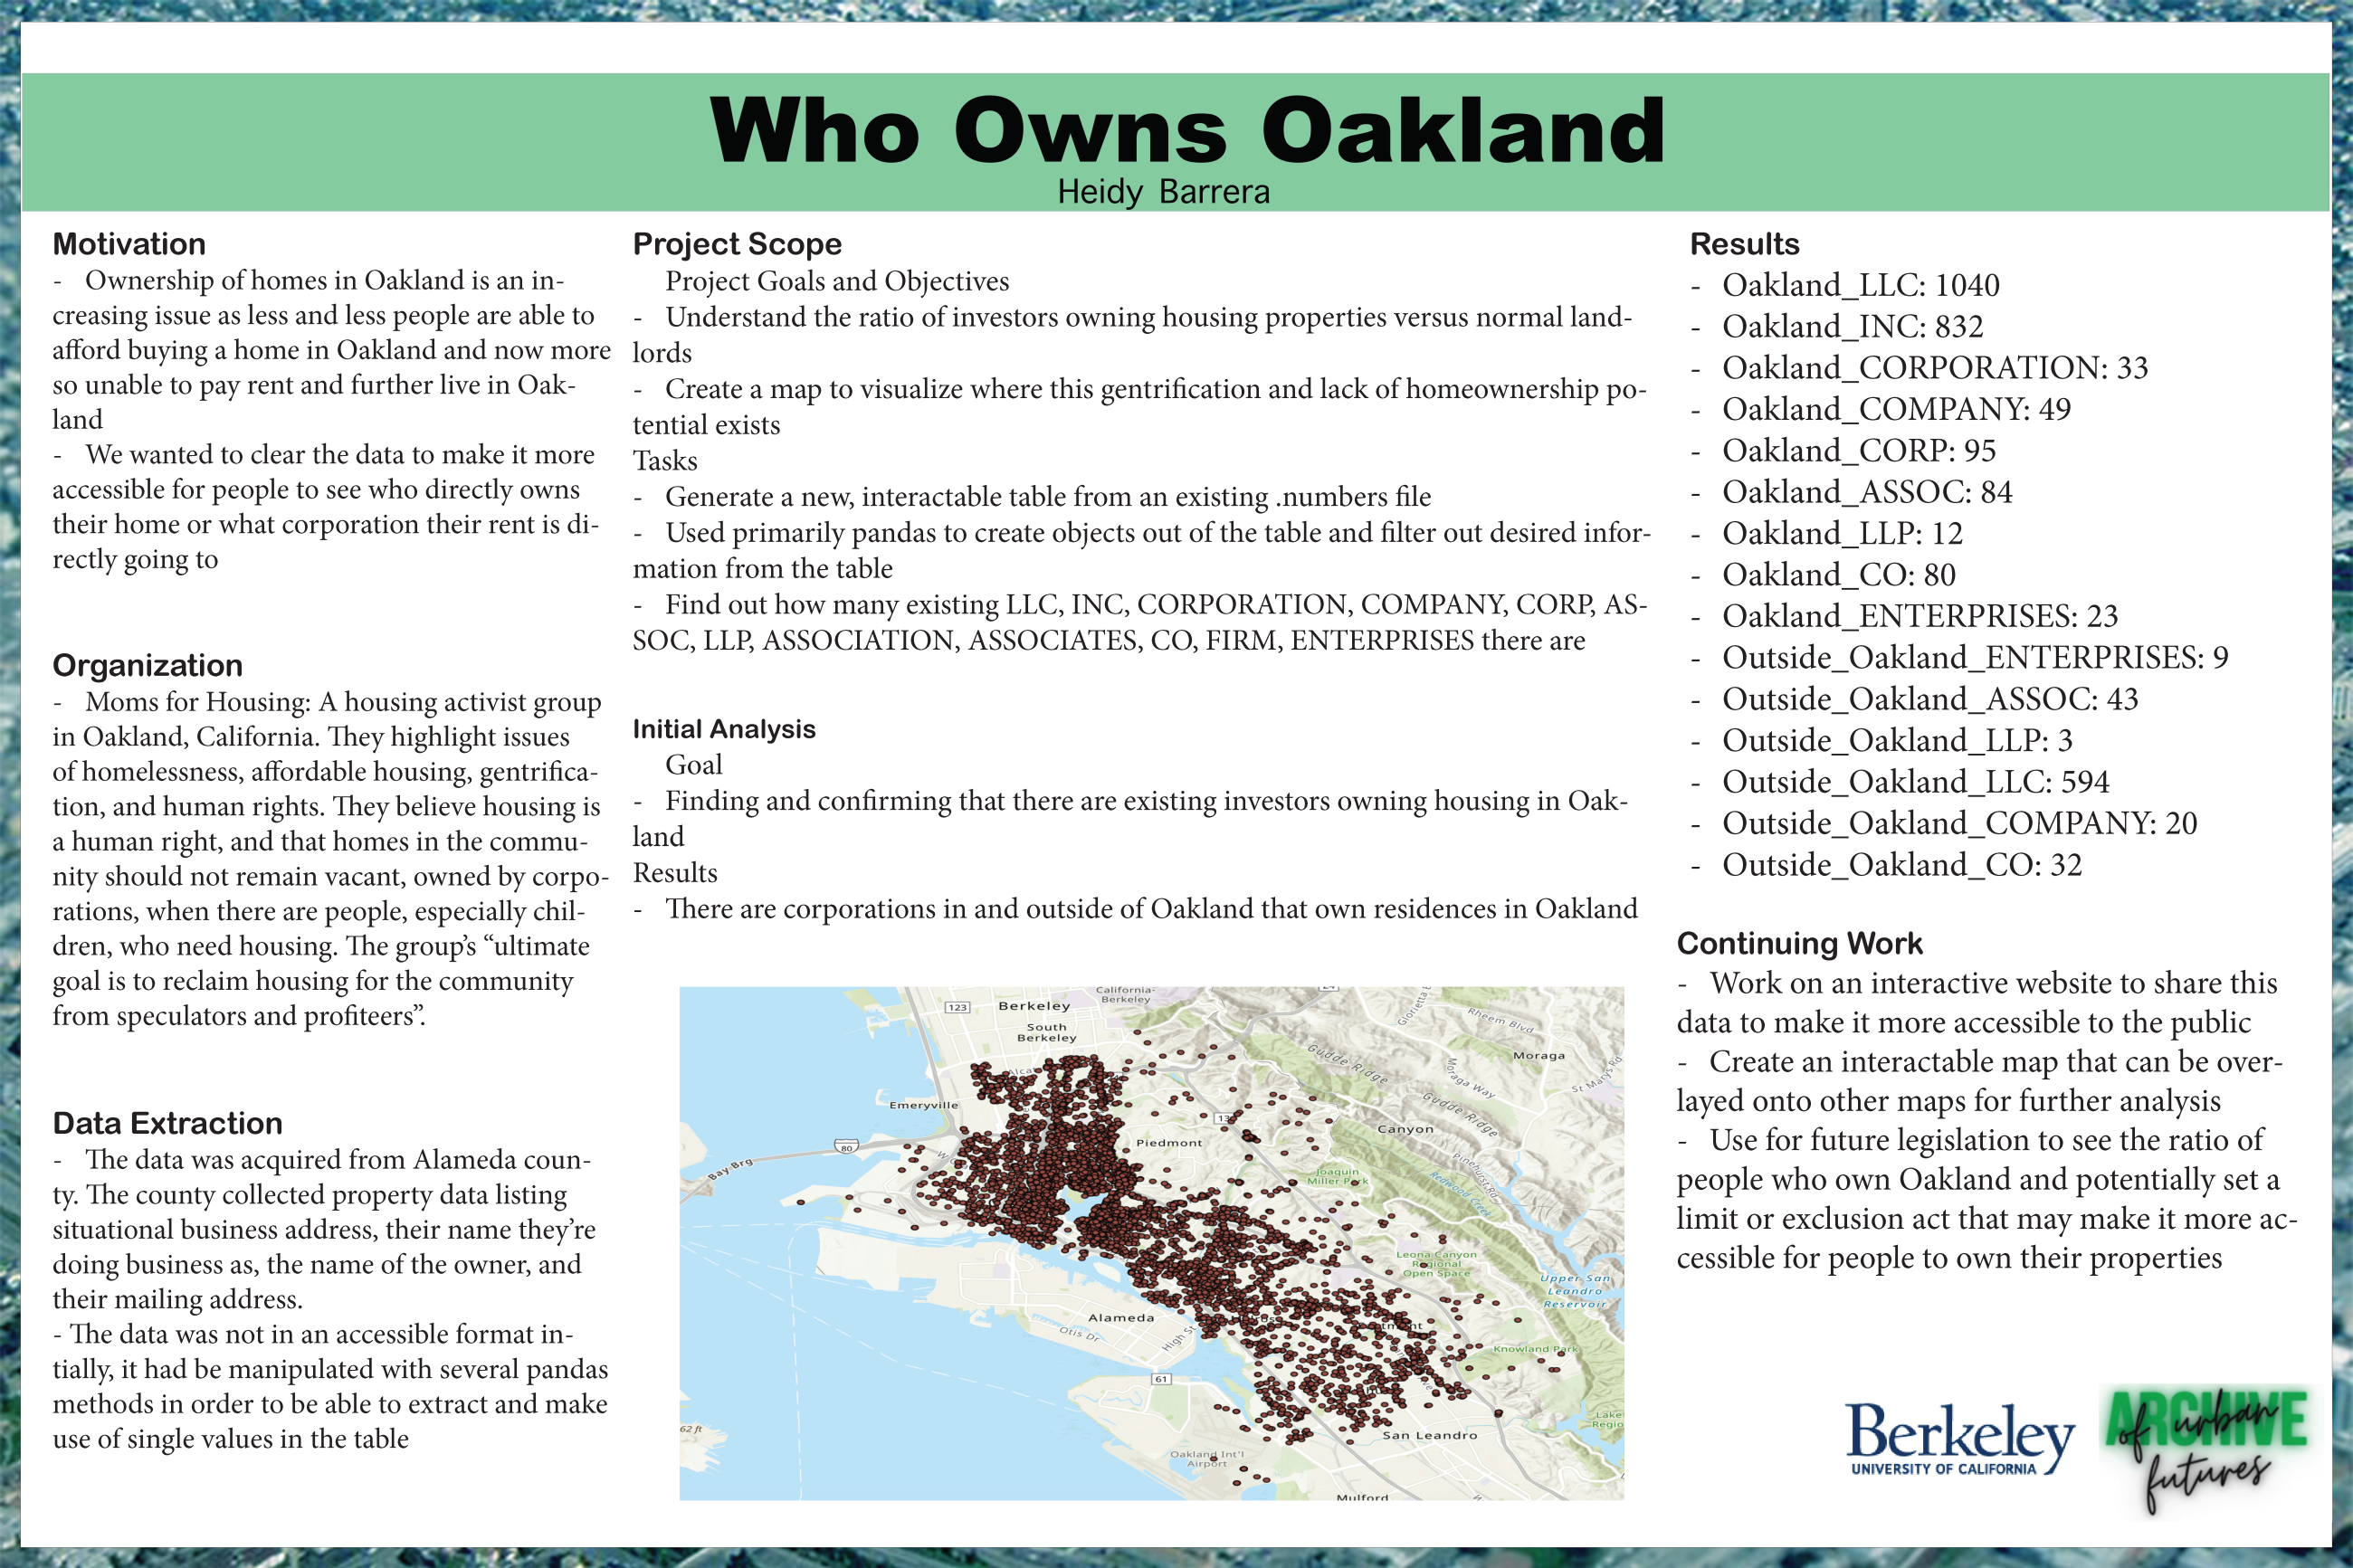 Archive of Urban Futures: Who Owns Oakland - Fall 2023 Discovery Project